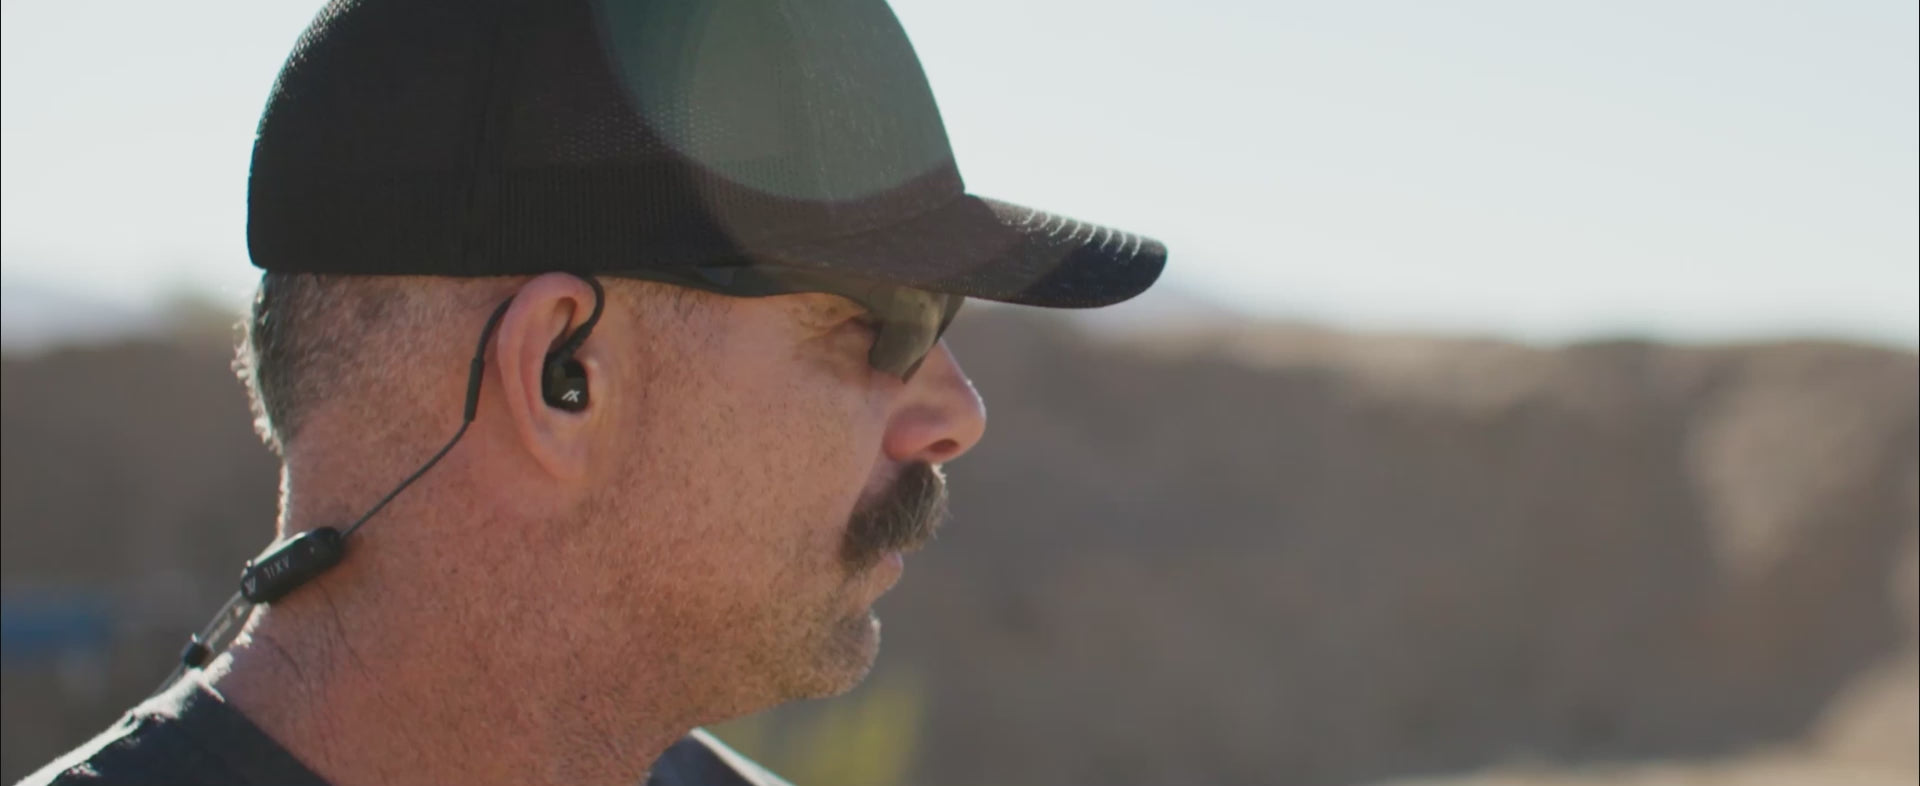 GS Extreme 2.0 Earbuds for Shooting – AXIL